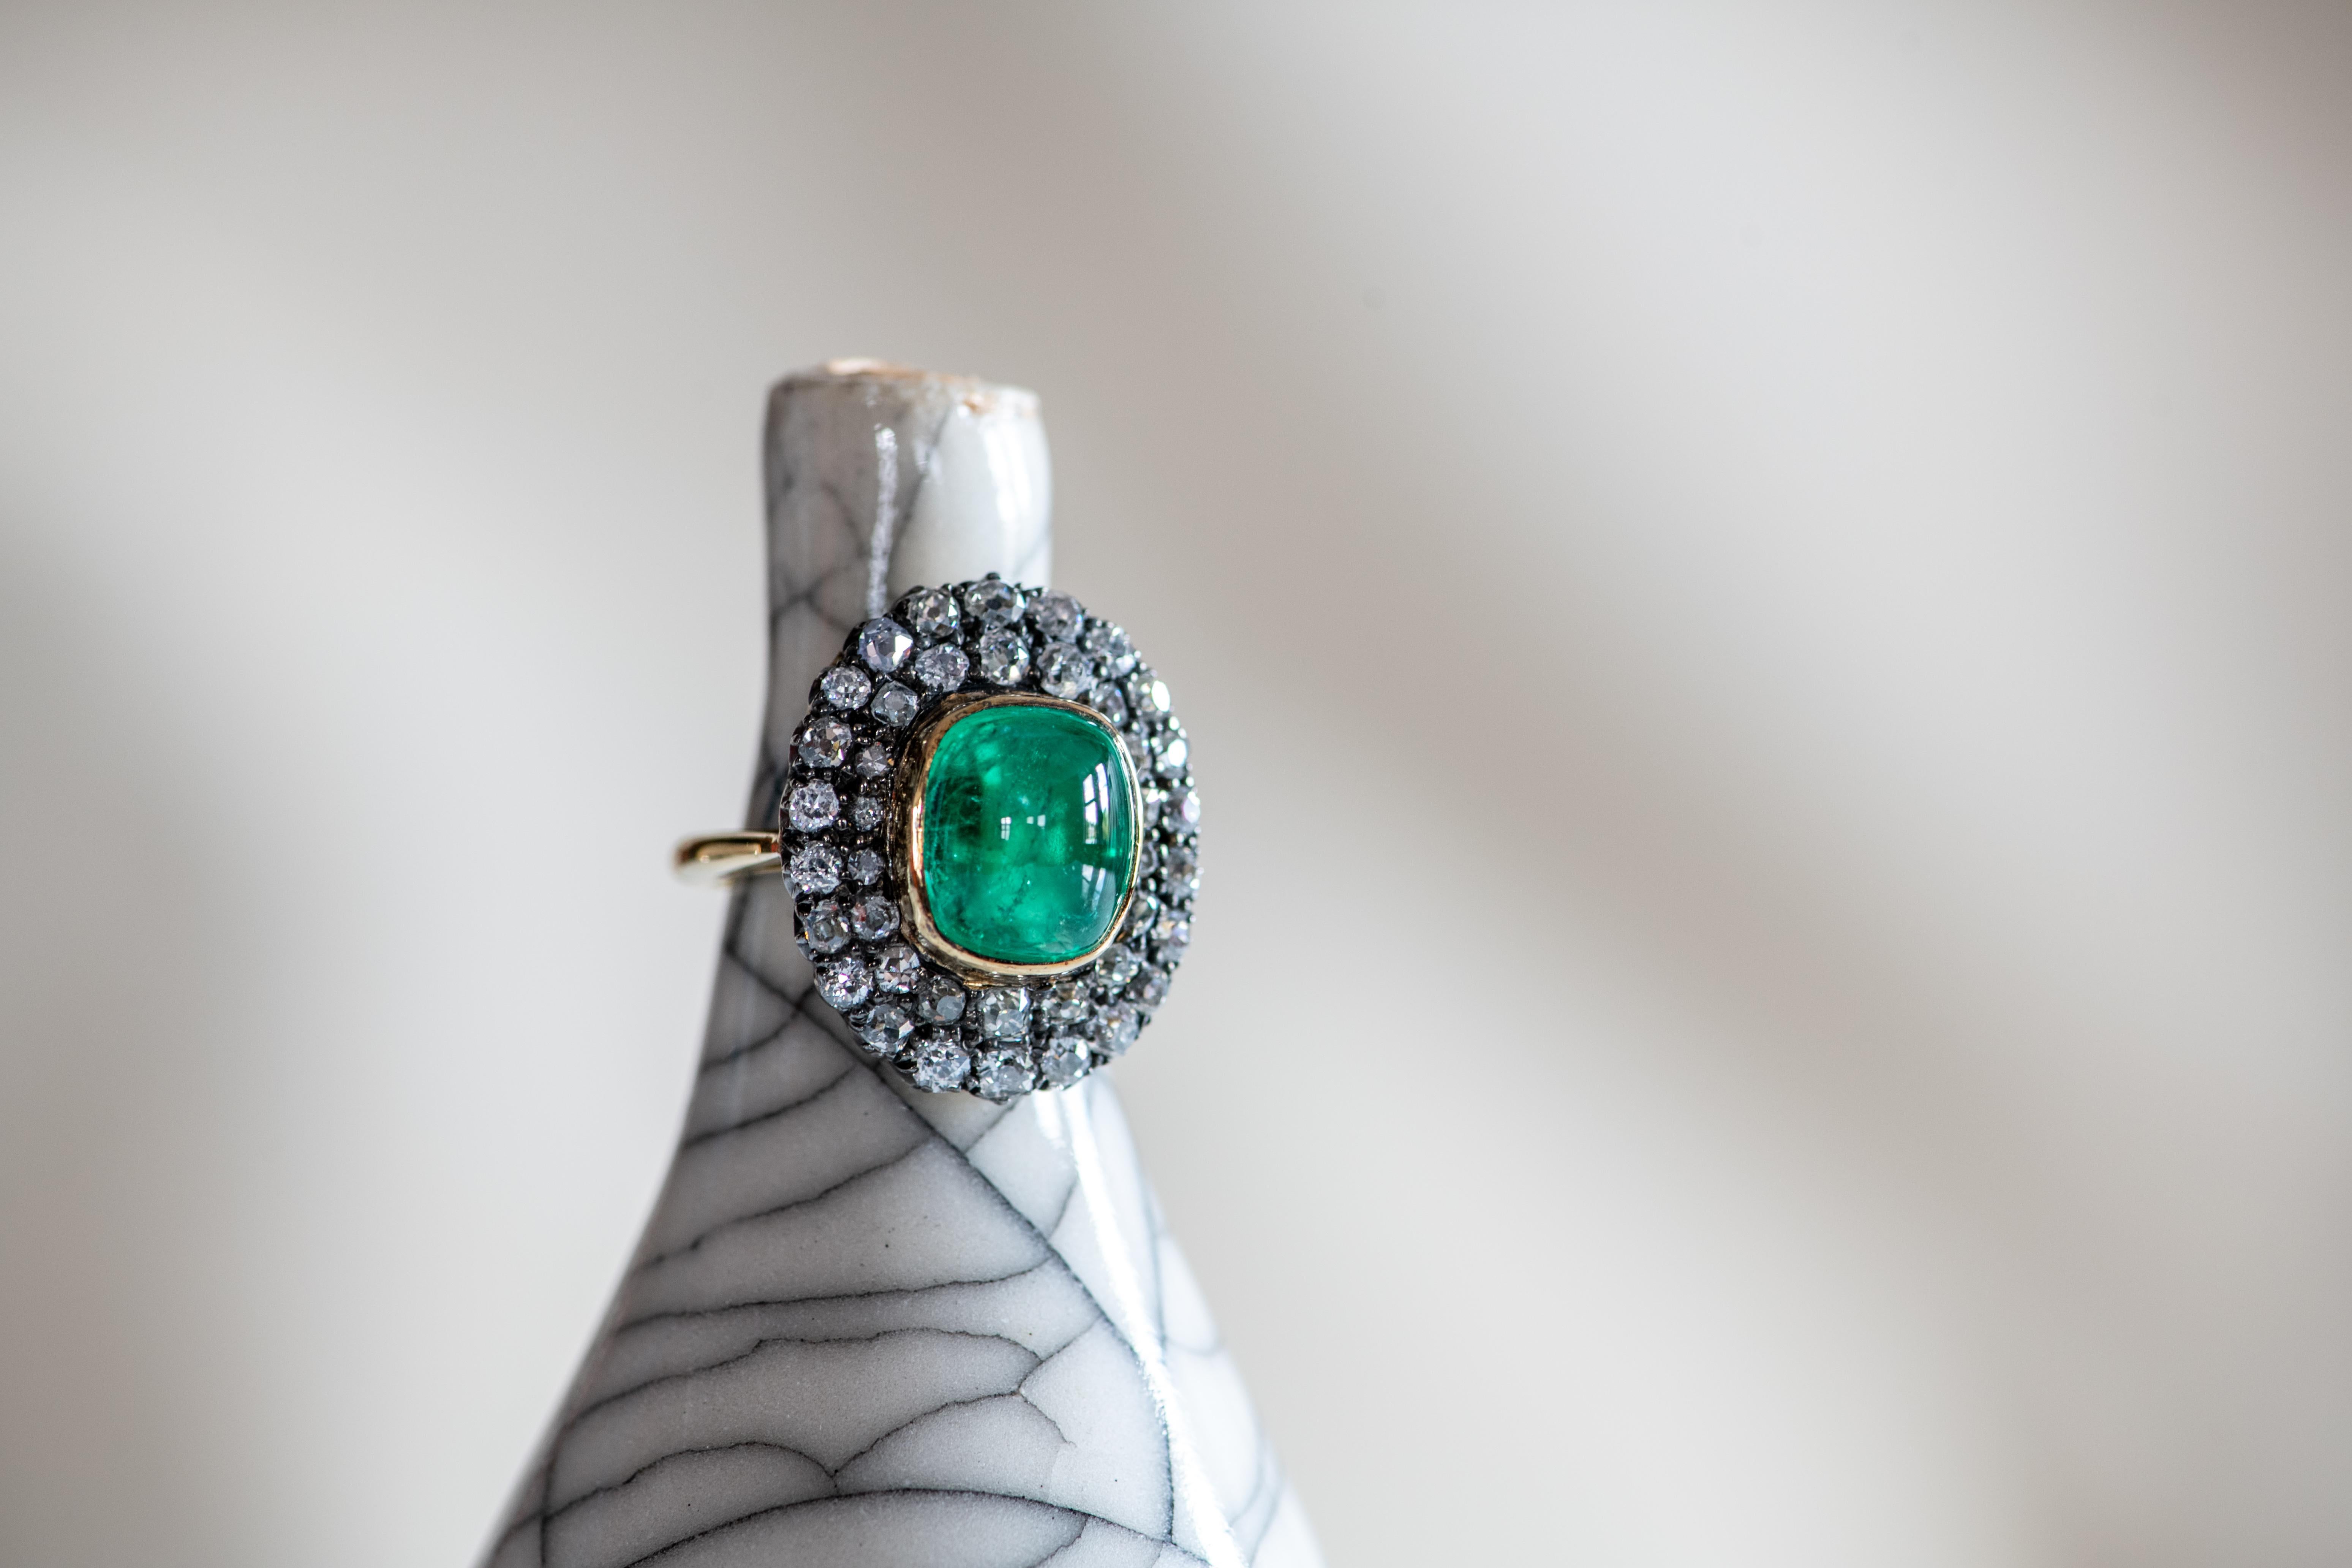 The large cabochon emerald at the centre of this vintage-style ring is bold and bright, its vivid green colour accentuated by a double-layered surround of round brilliant white diamonds. Hand-crafted in the Haruni workshop, this is a dazzling ring